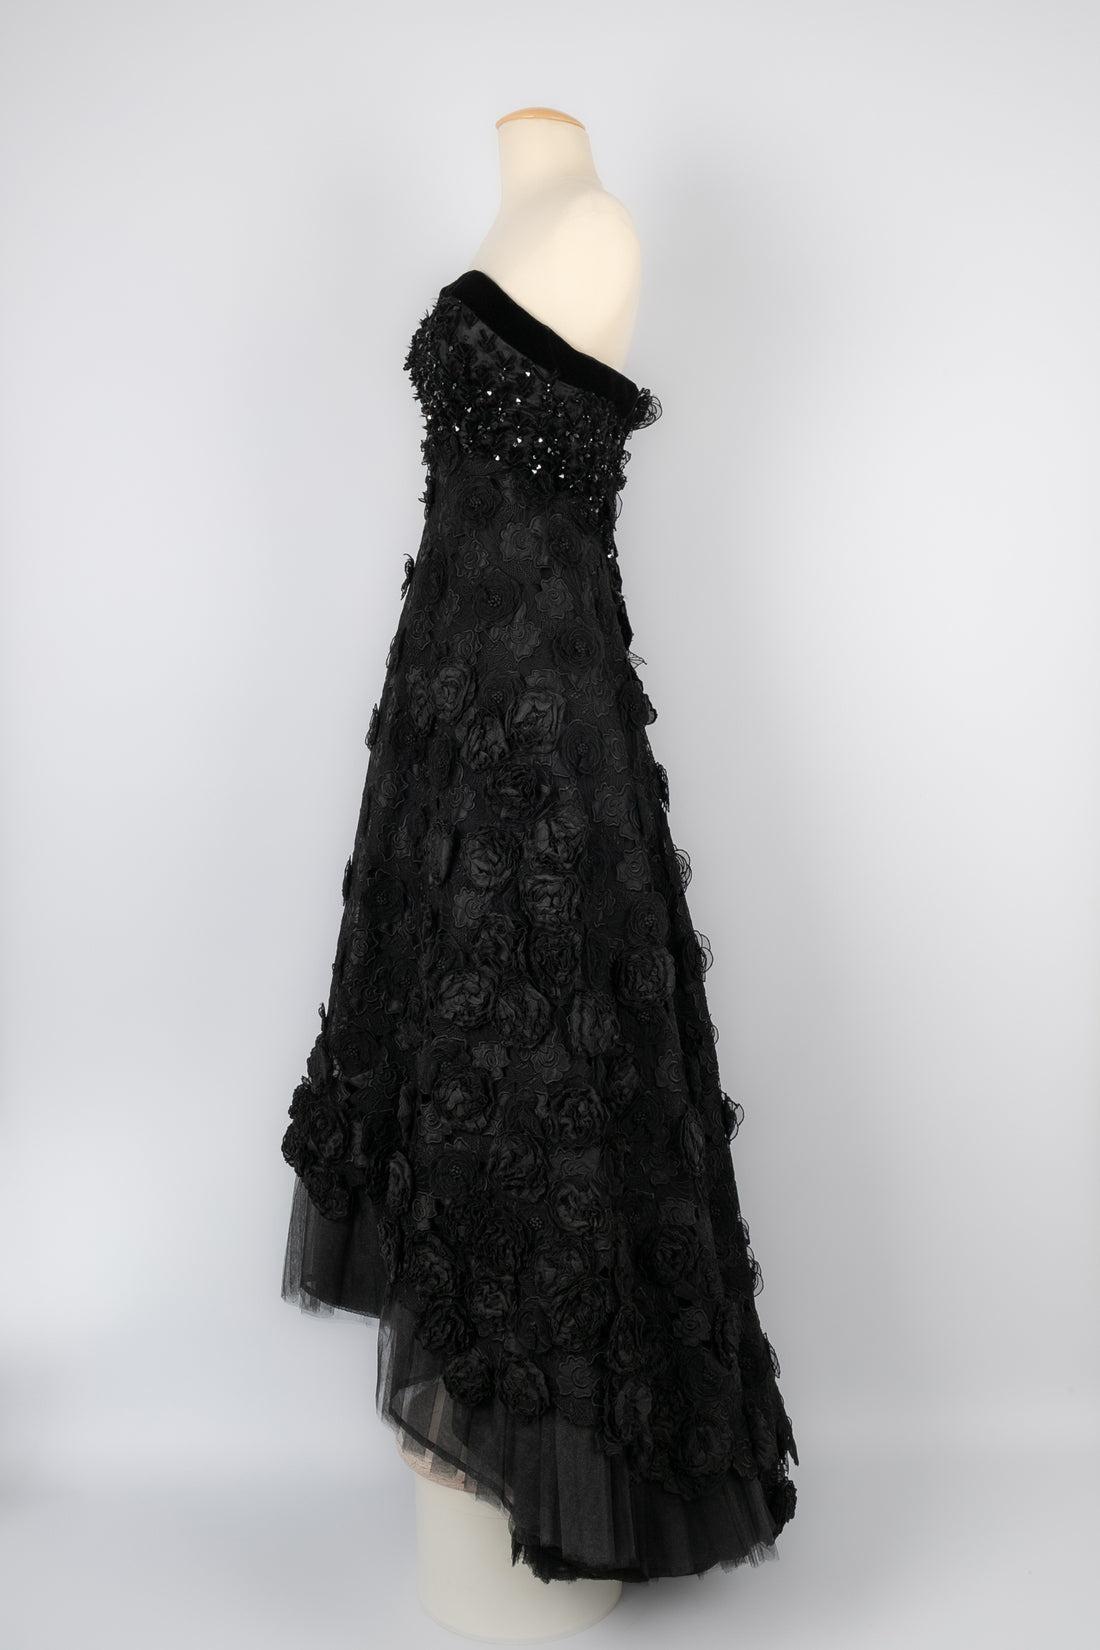 Christian Lacroix -Haute Couture bustier dress with velvet, guipure, and tulle. No size nor composition label, it fits a 36FR/38FR.

Additional information:
Condition: Very good condition
Dimensions: Chest: 48 cm - Waist: 38 cm - Length: from 120 cm